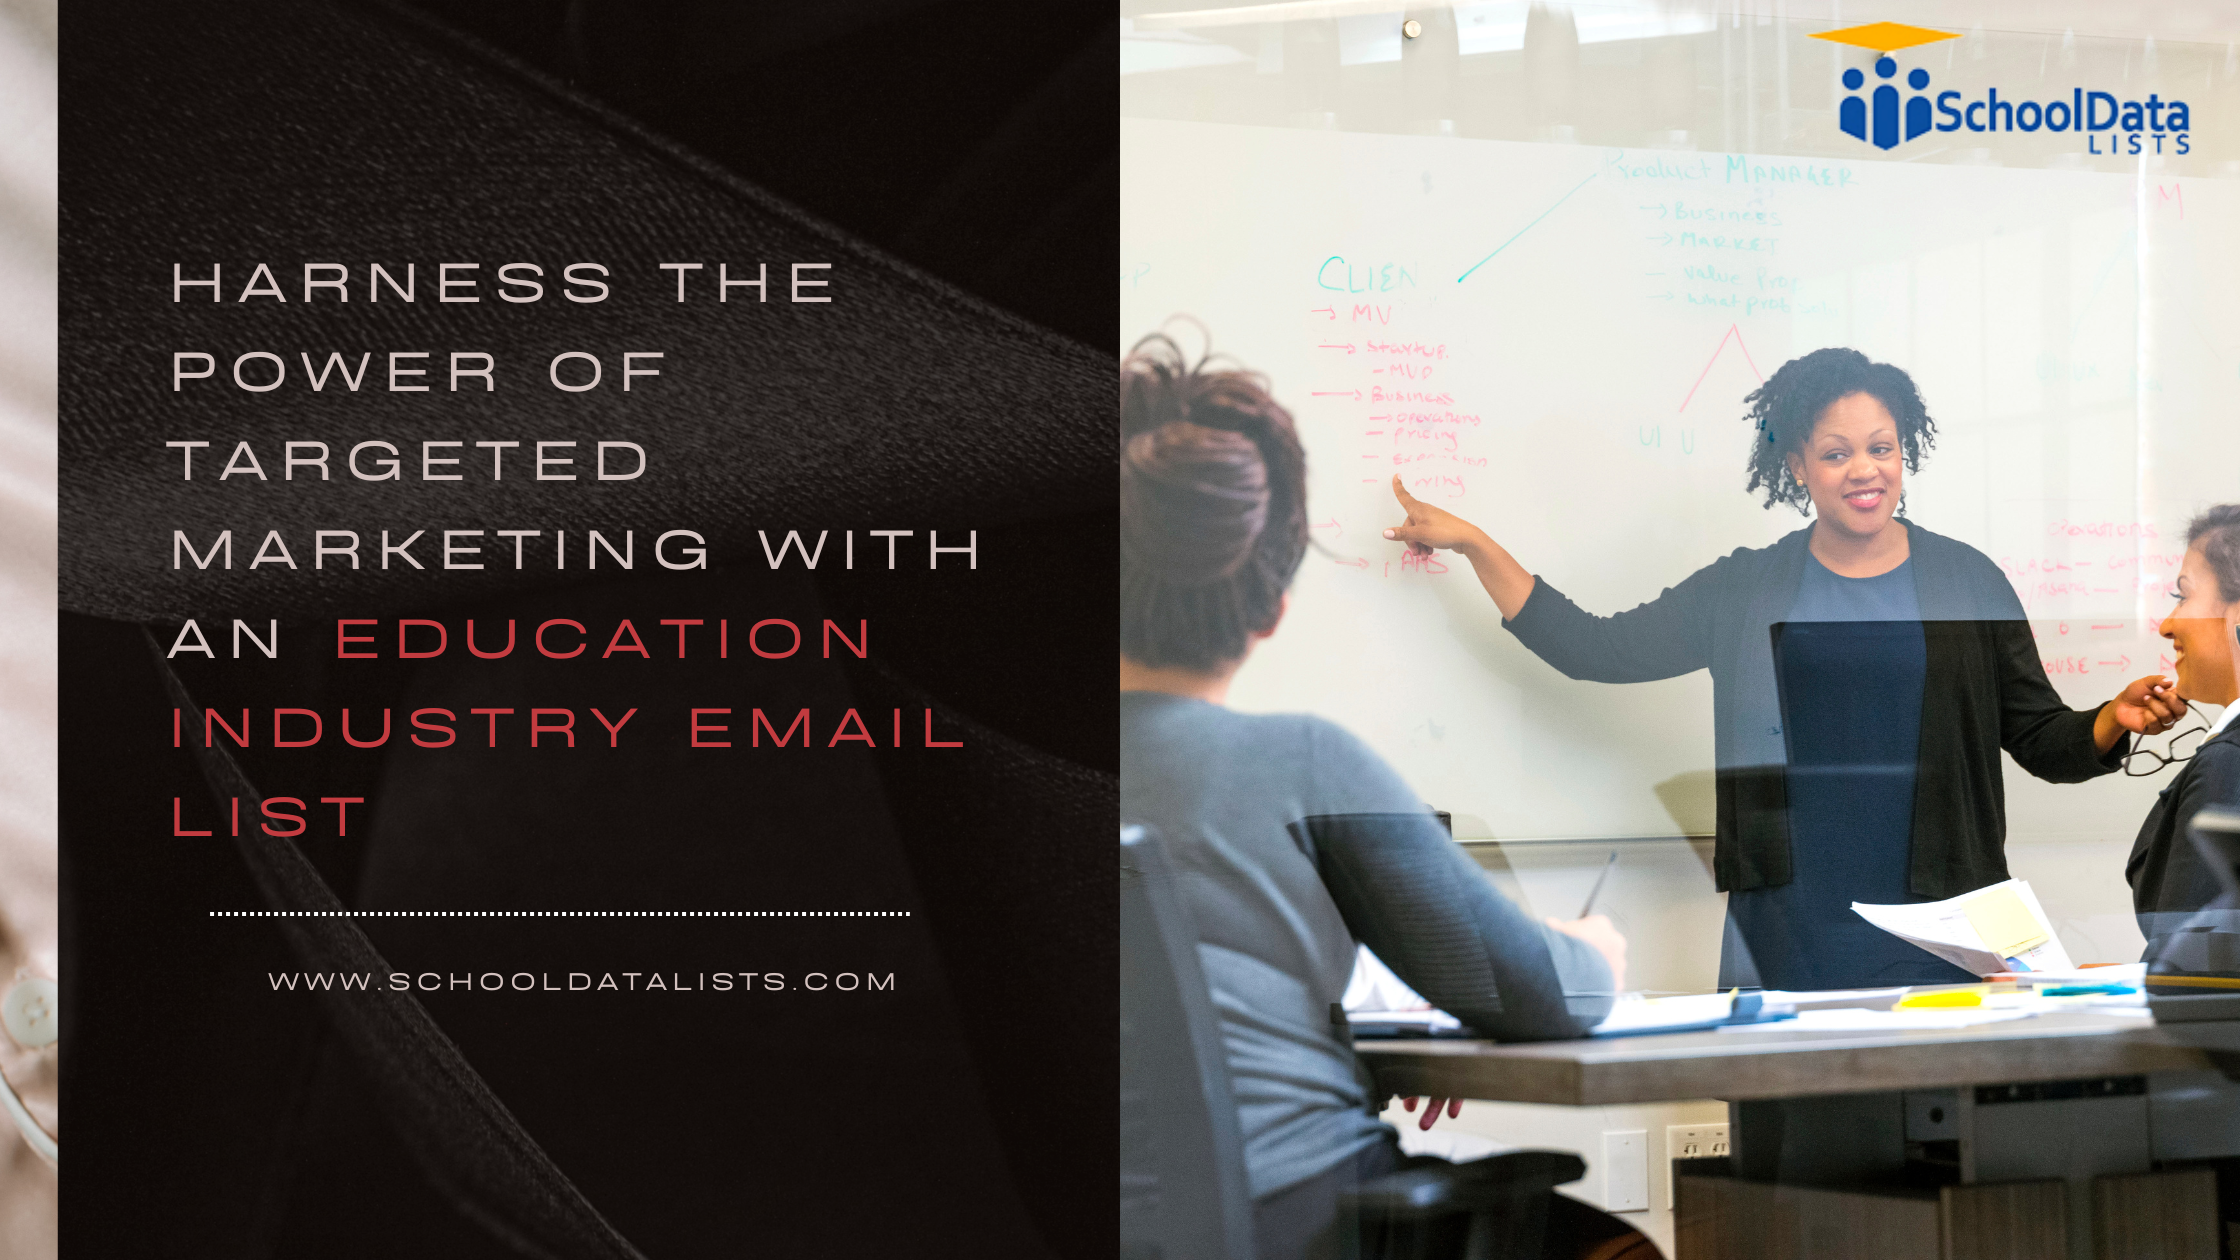 Harness the Power of Targeted Marketing with an Education Industry Email List